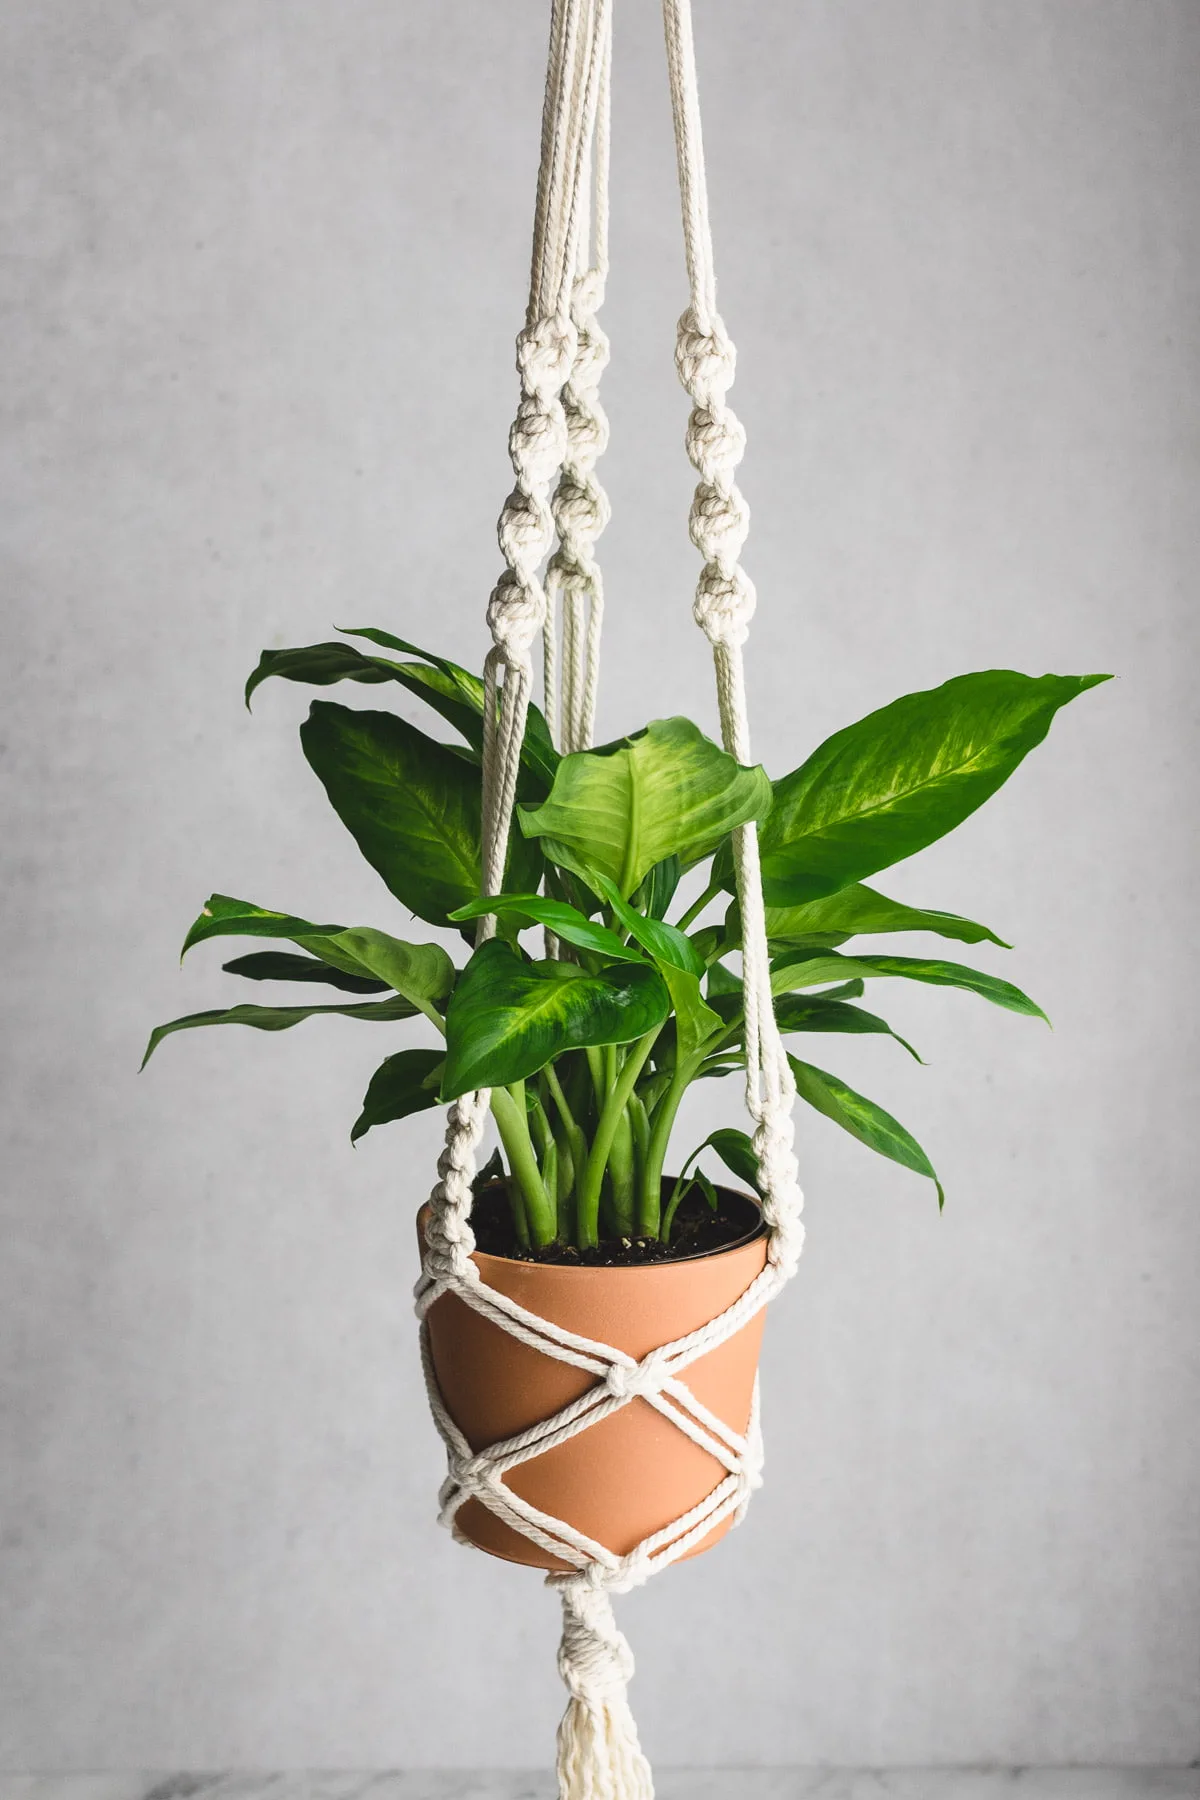 photo of a DIY Macrame Plant hanger as a mothers day homemade gift ideas